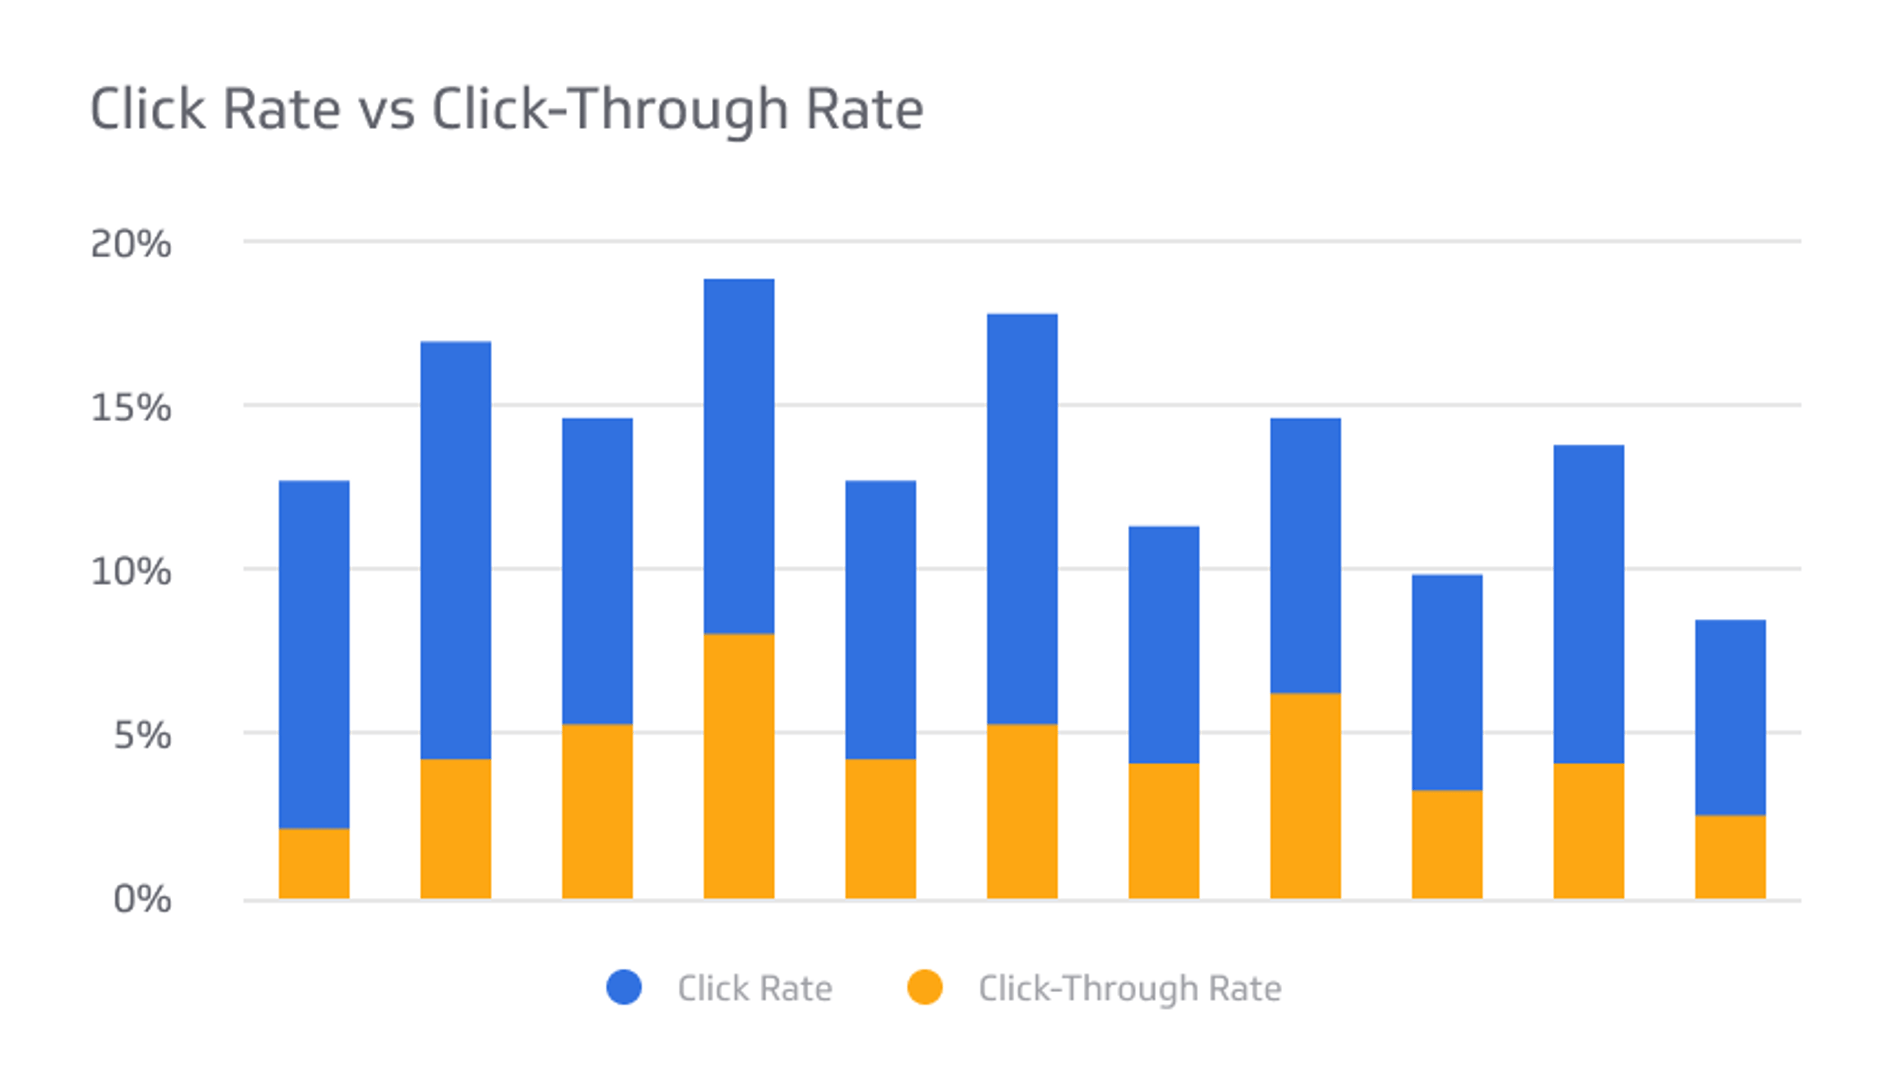 Click Rate vs. Click to Open Rate - Whats The Difference?